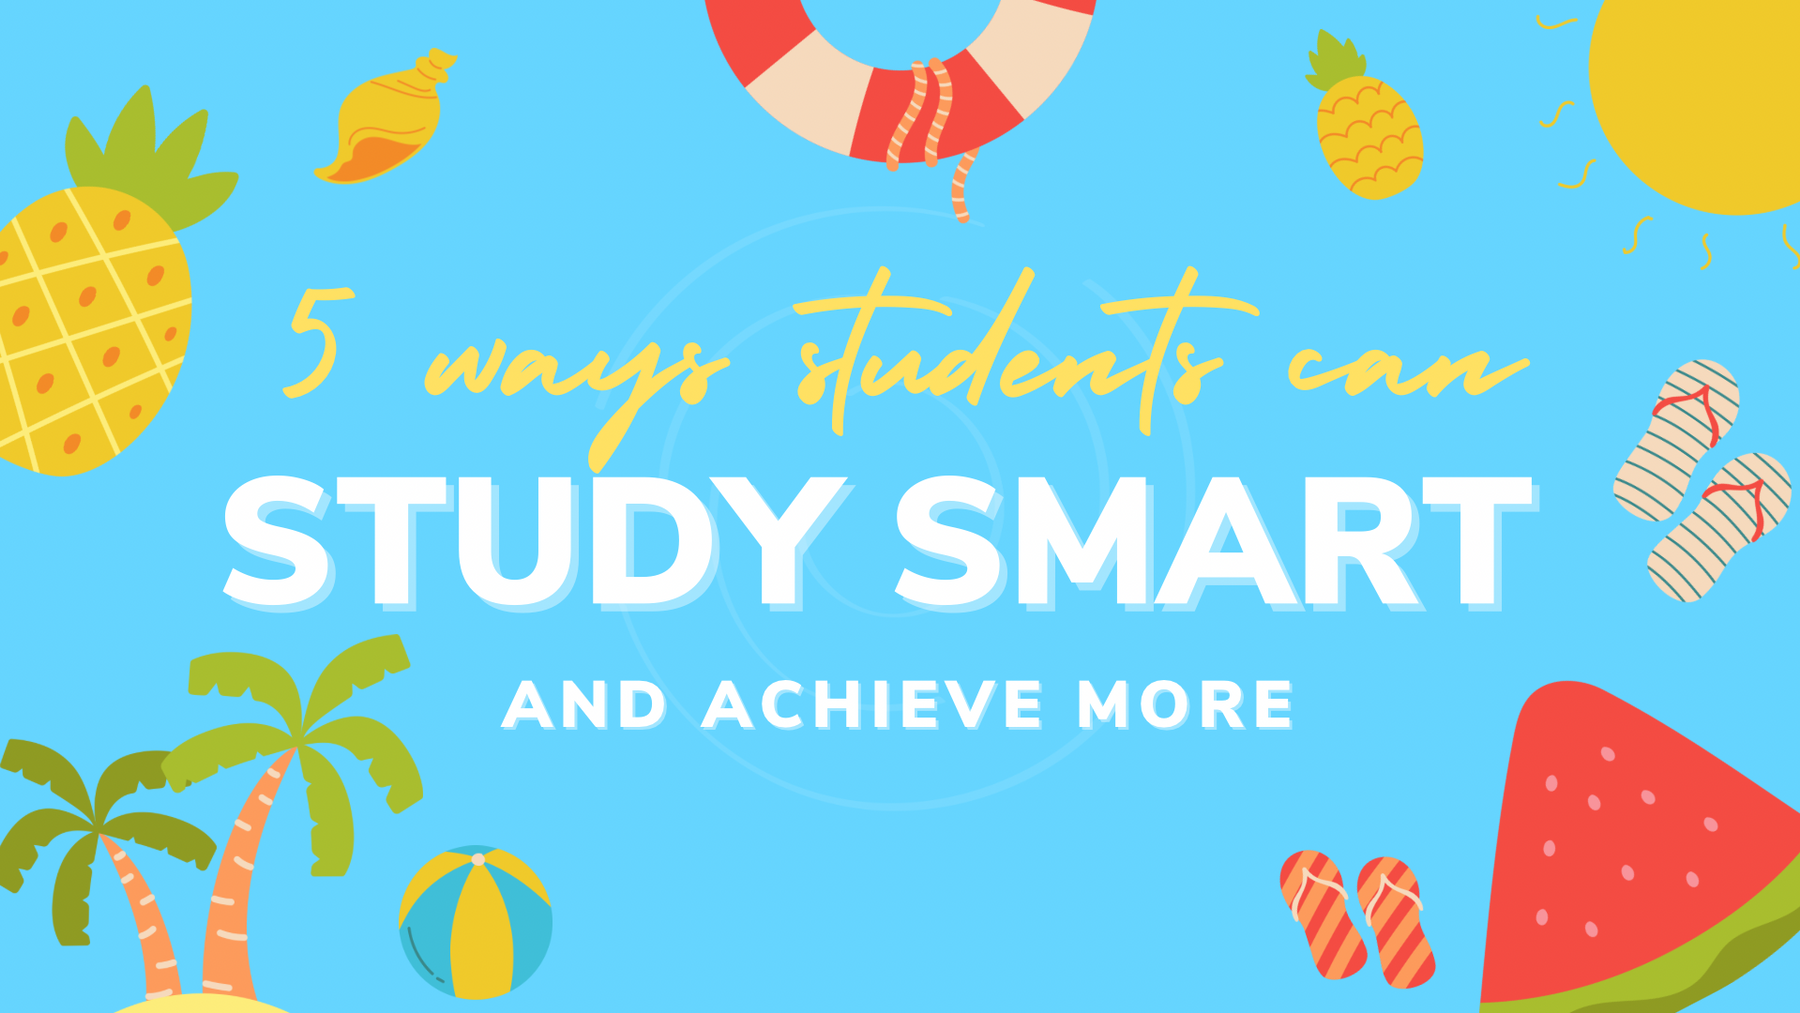 5 Ways Students Can Study Smart and Achieve More